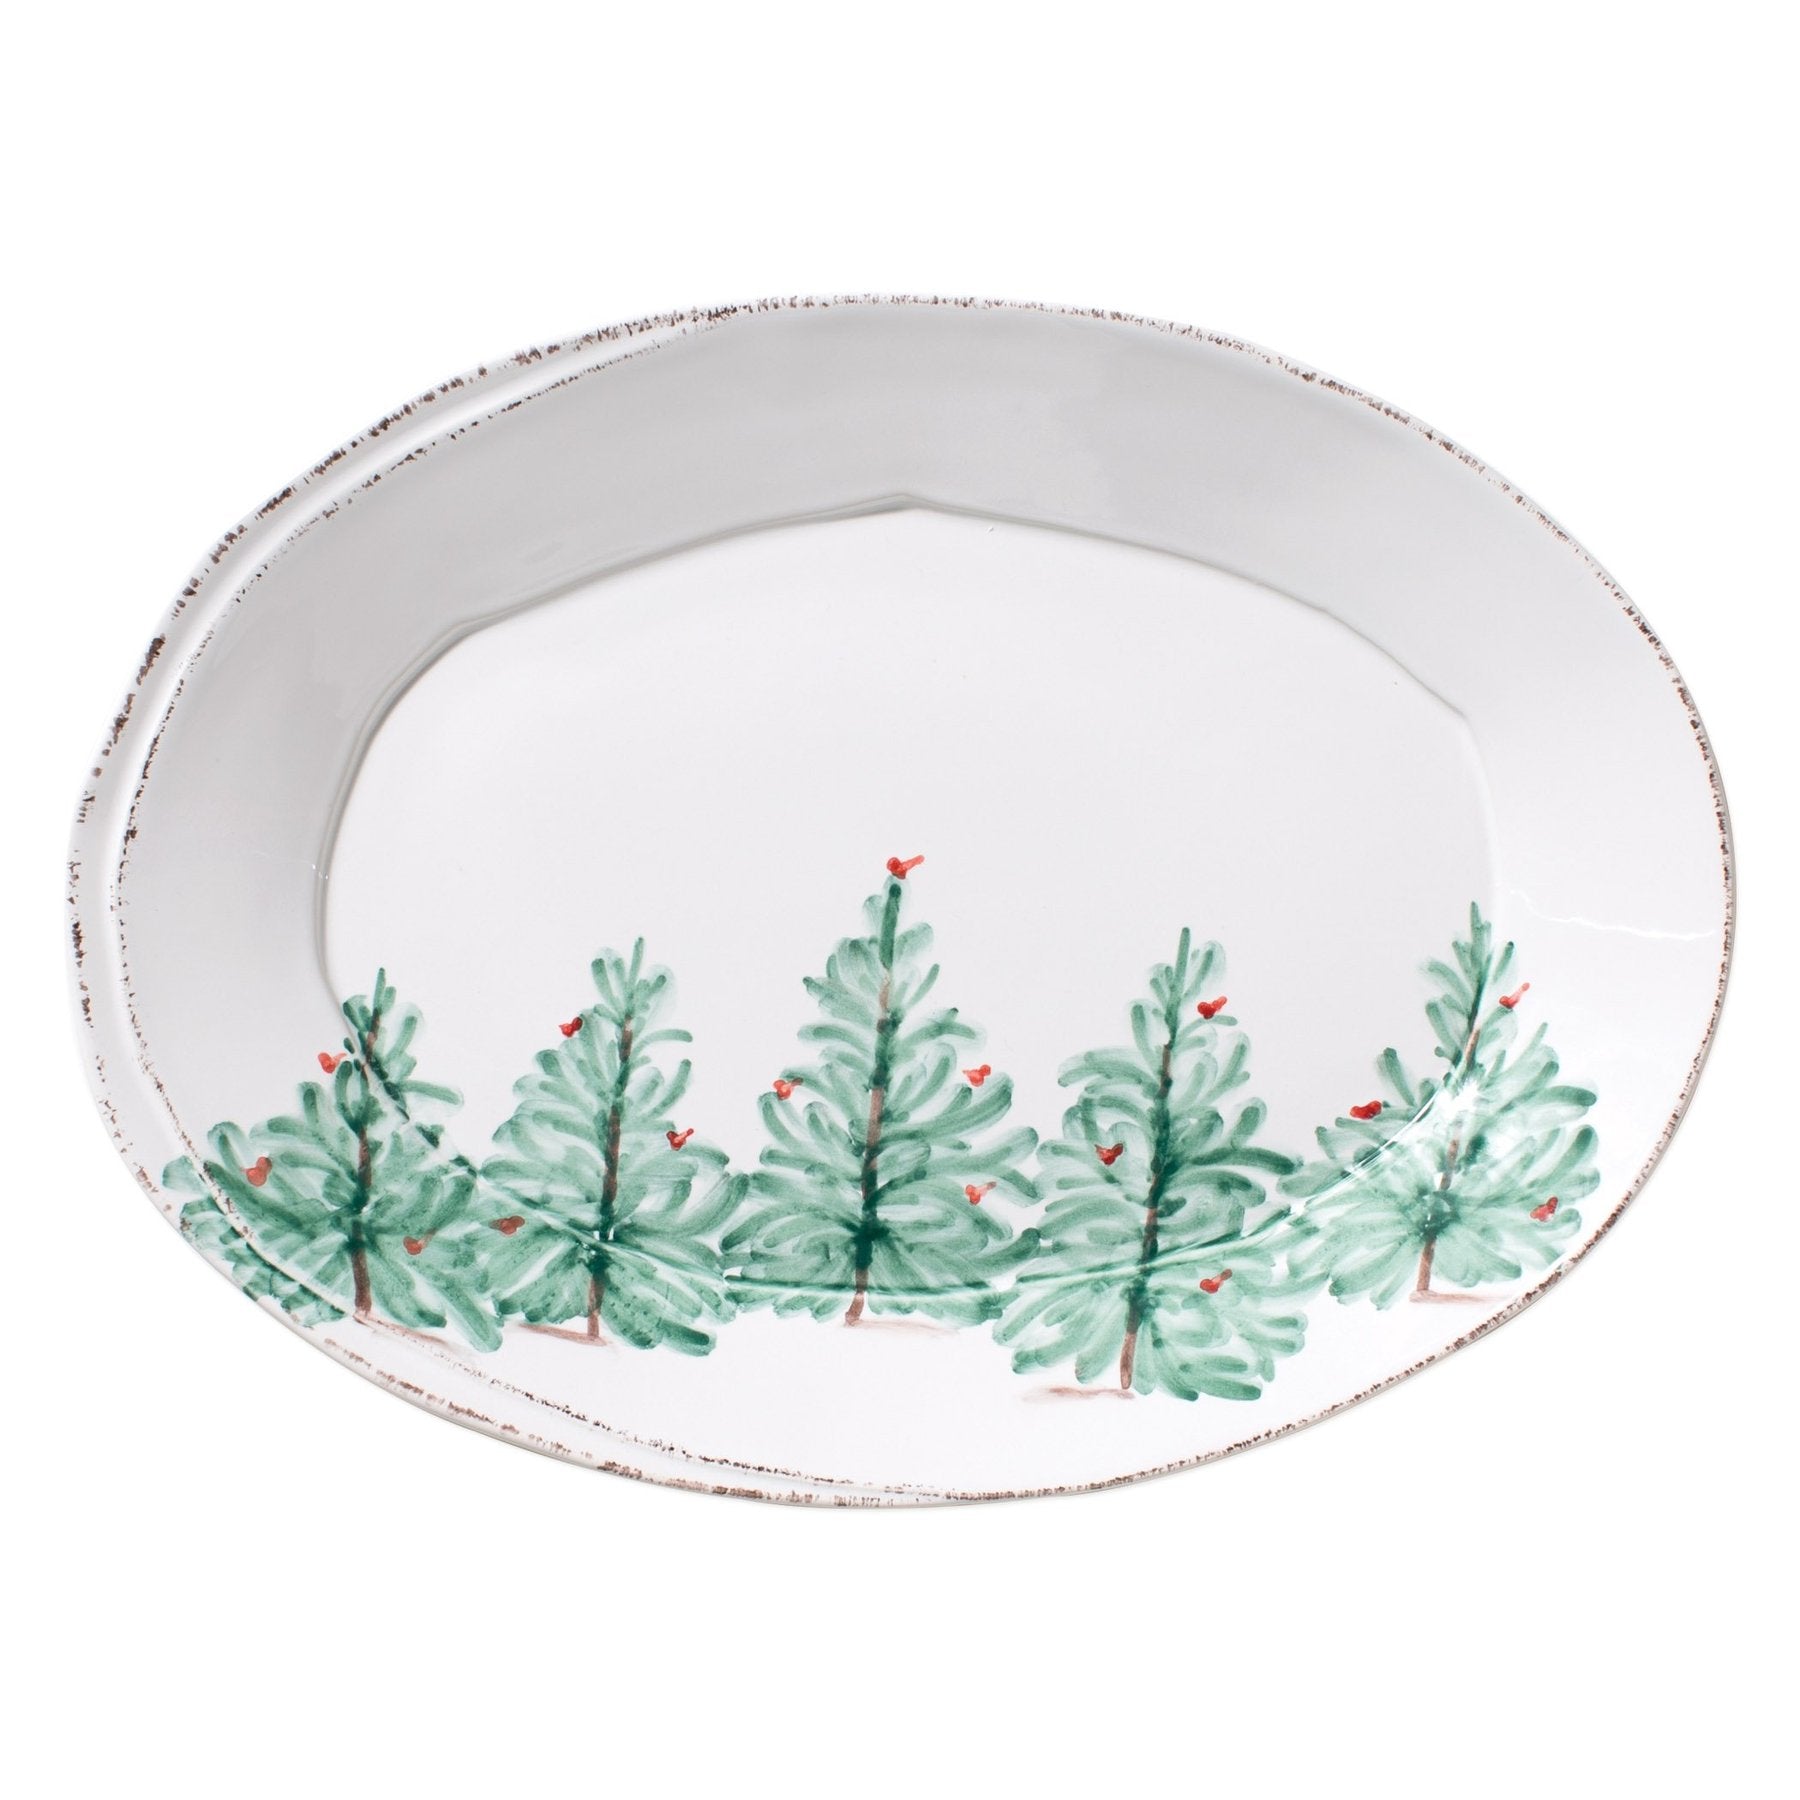 oval holiday platter with trees on white background.